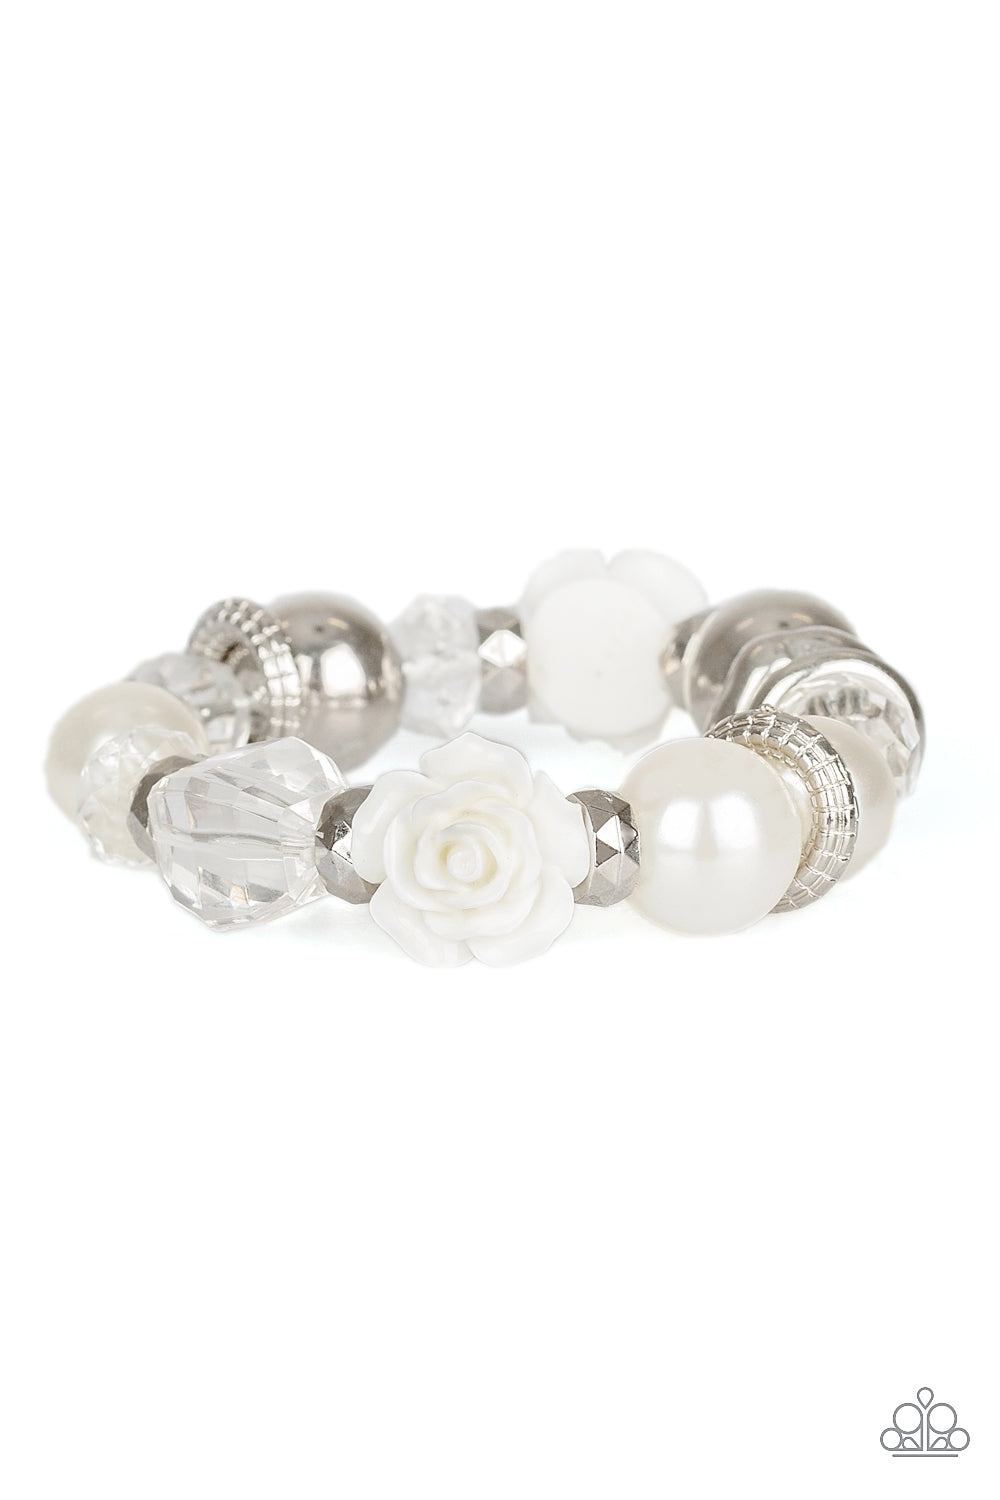 HERE I AM - WHITE PEARLS ROSE SILVER BEADS STRETCH BRACELET